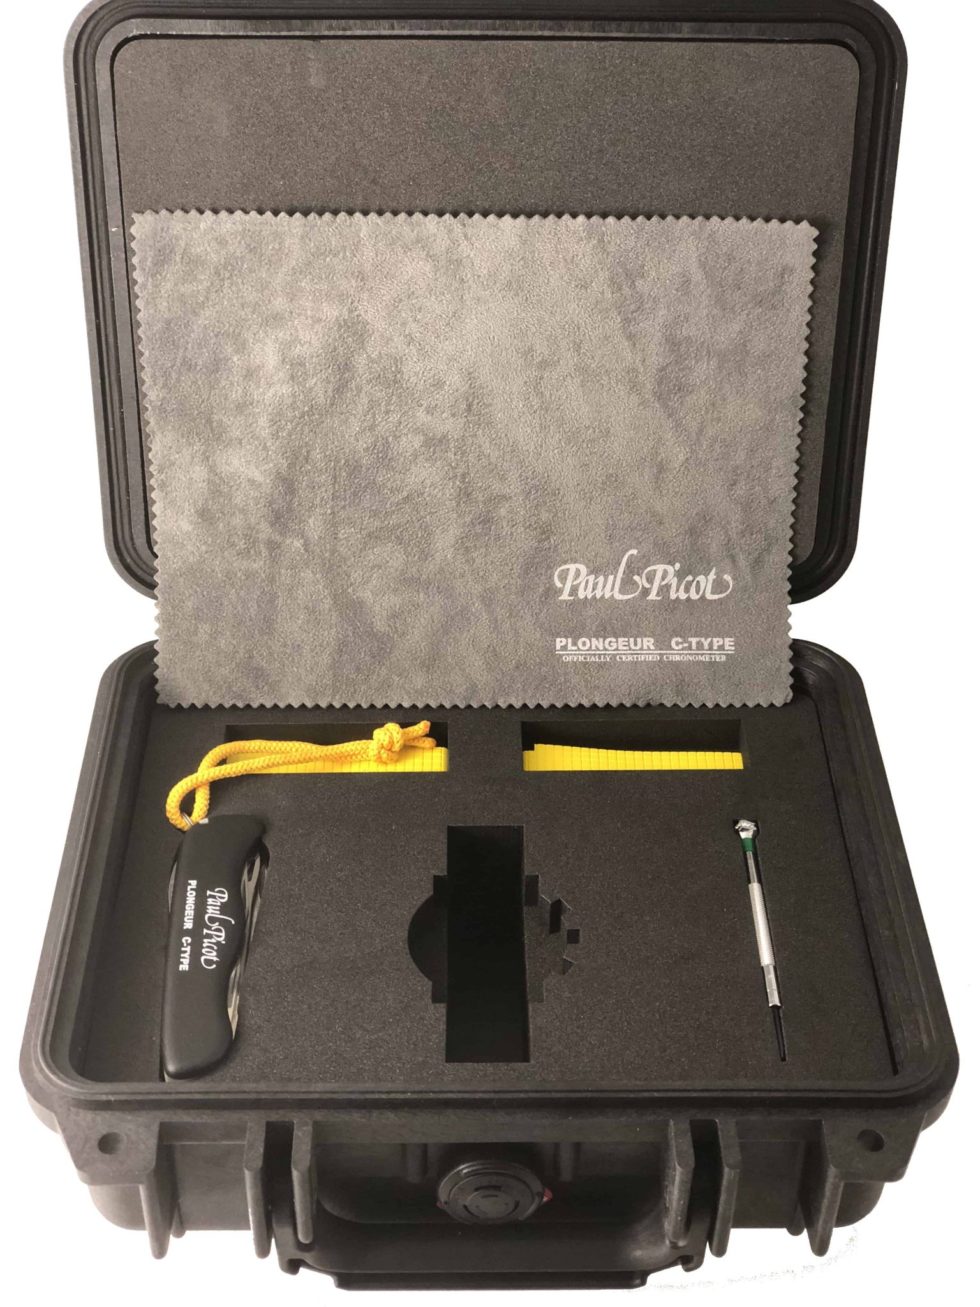 Paul Picot C Type Compass Pelican Watch Box With Swiss Army Pocket Knife Screwdriver - Baer & Bosch Auctioneers